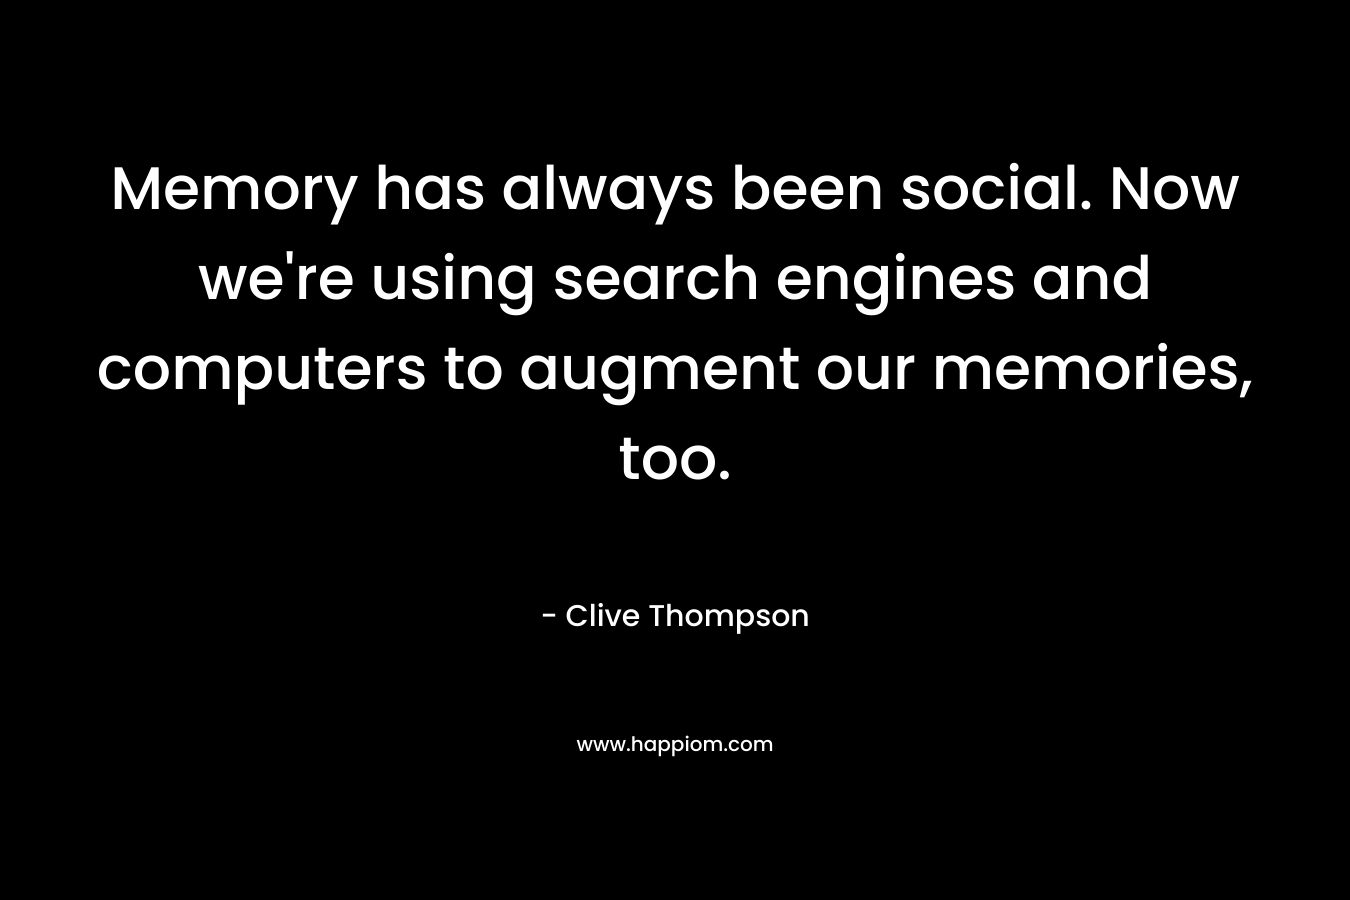 Memory has always been social. Now we're using search engines and computers to augment our memories, too.